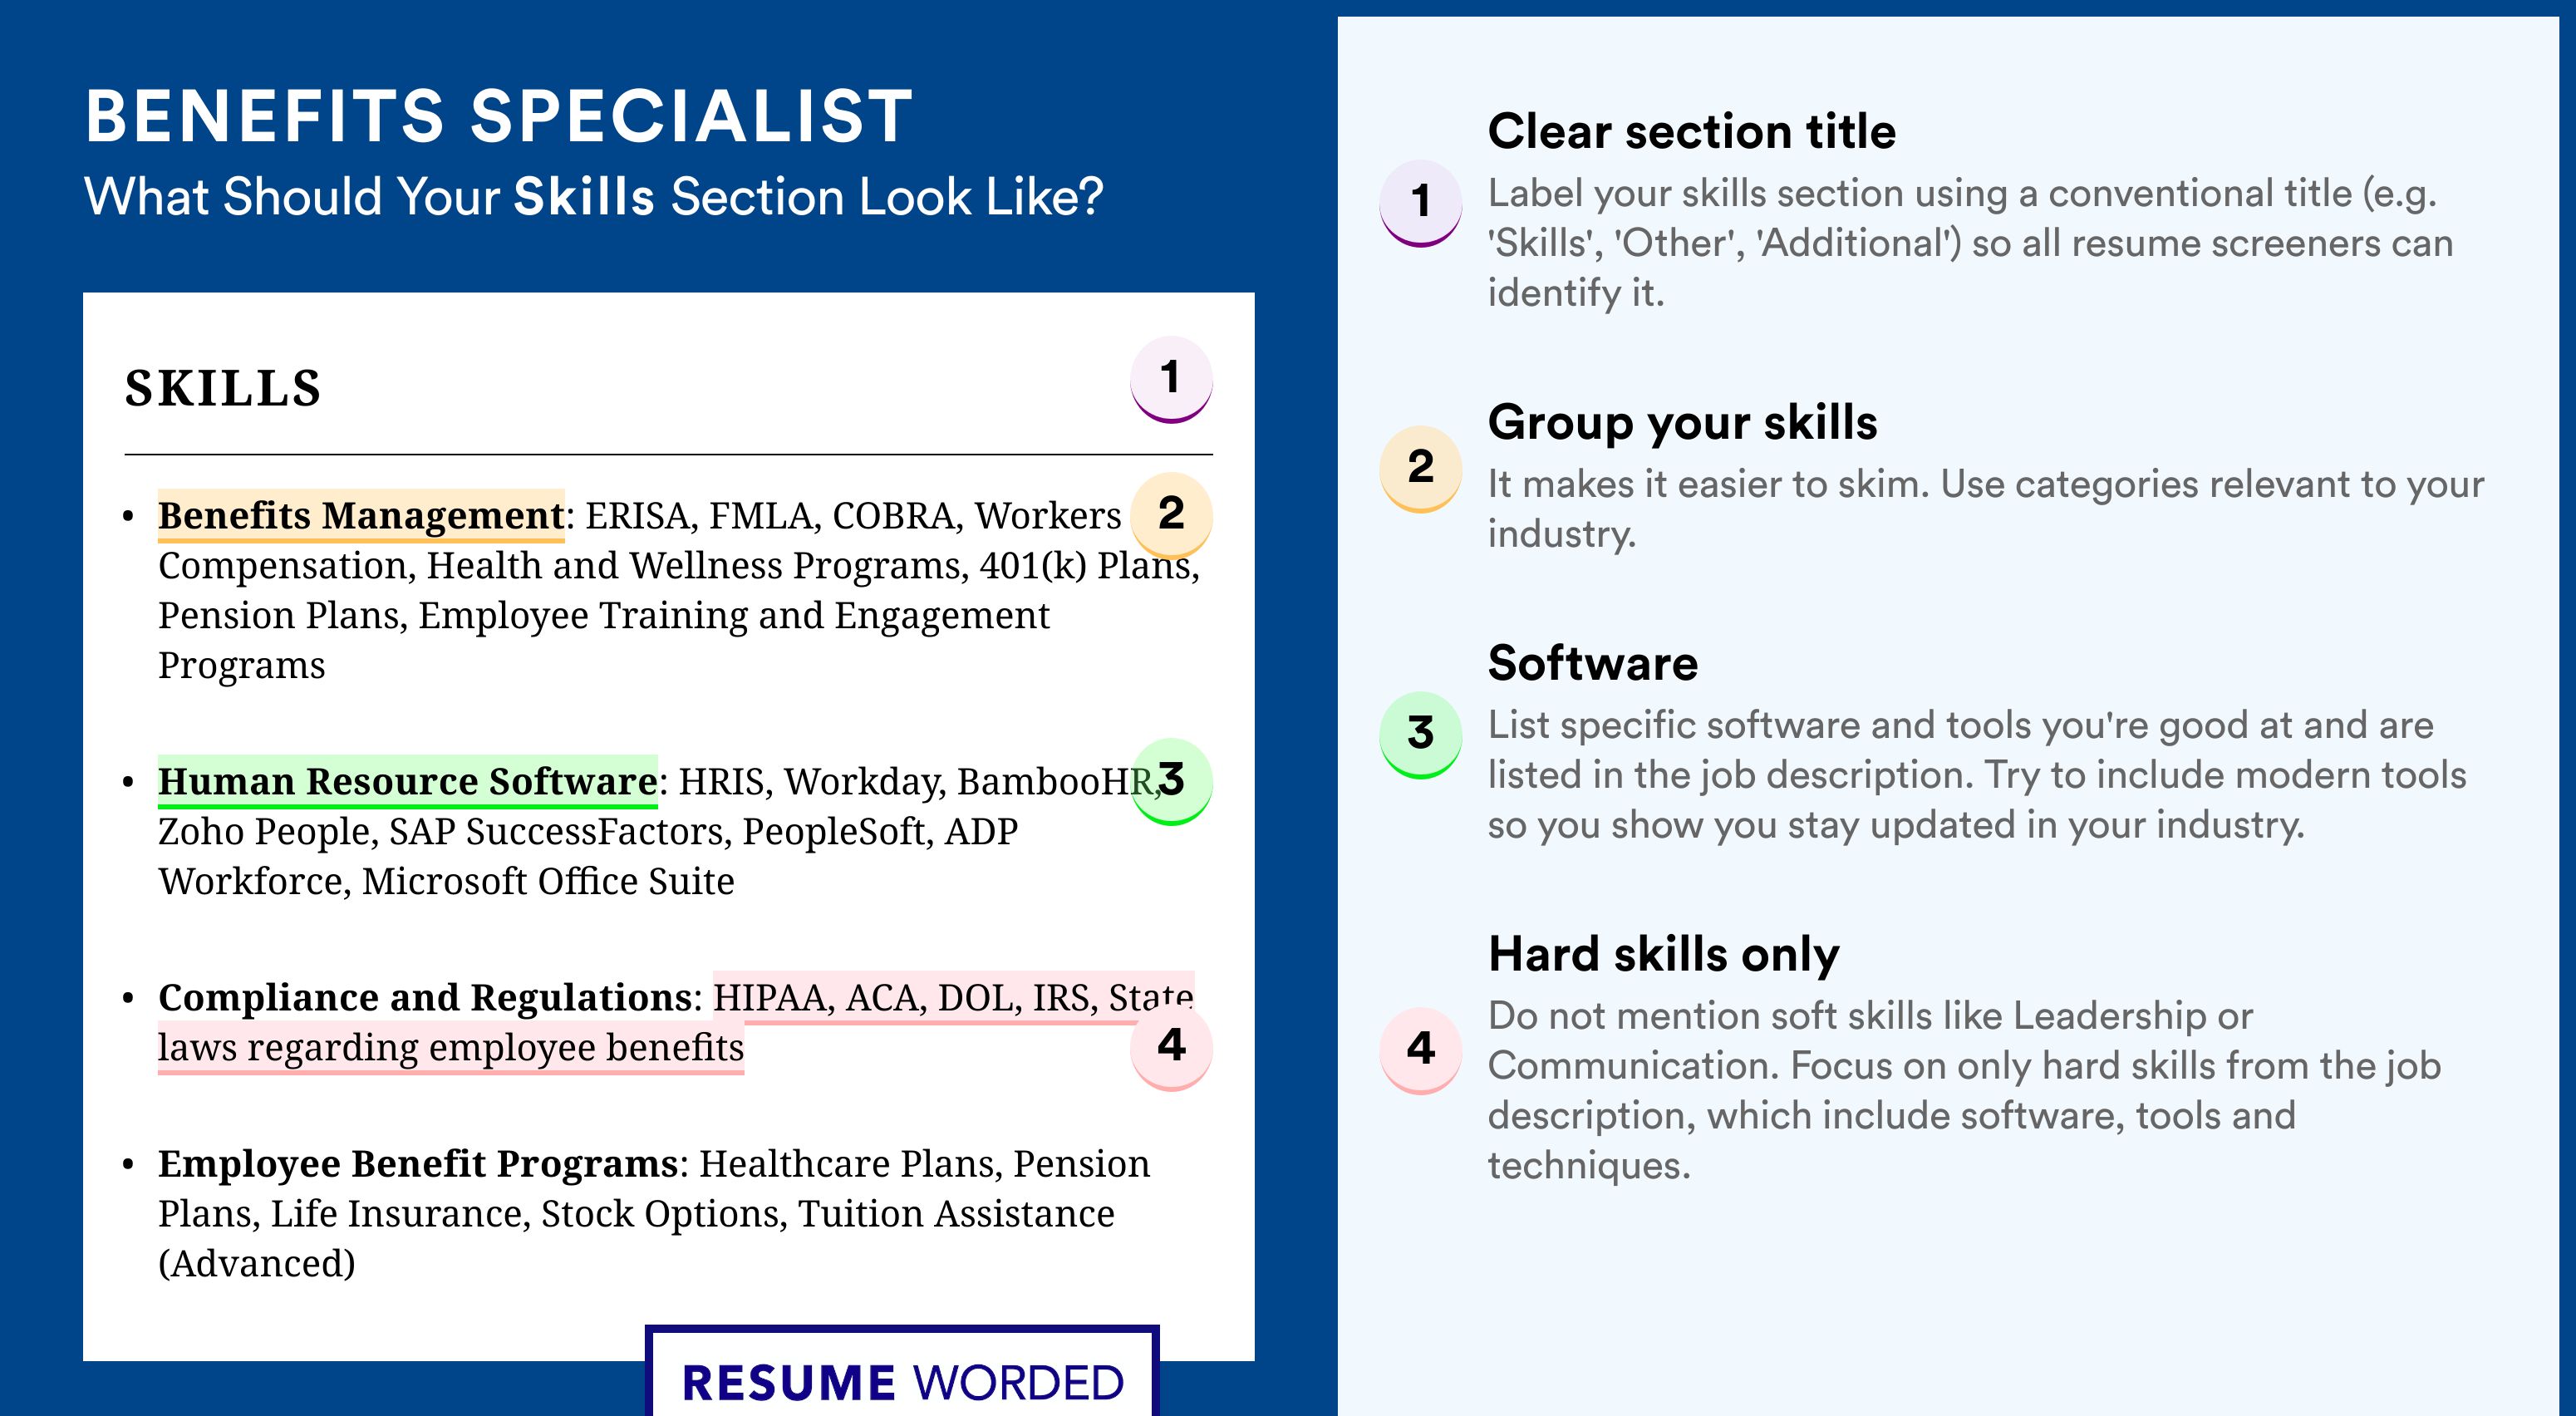 How To Write Your Skills Section - Benefits Specialist Roles